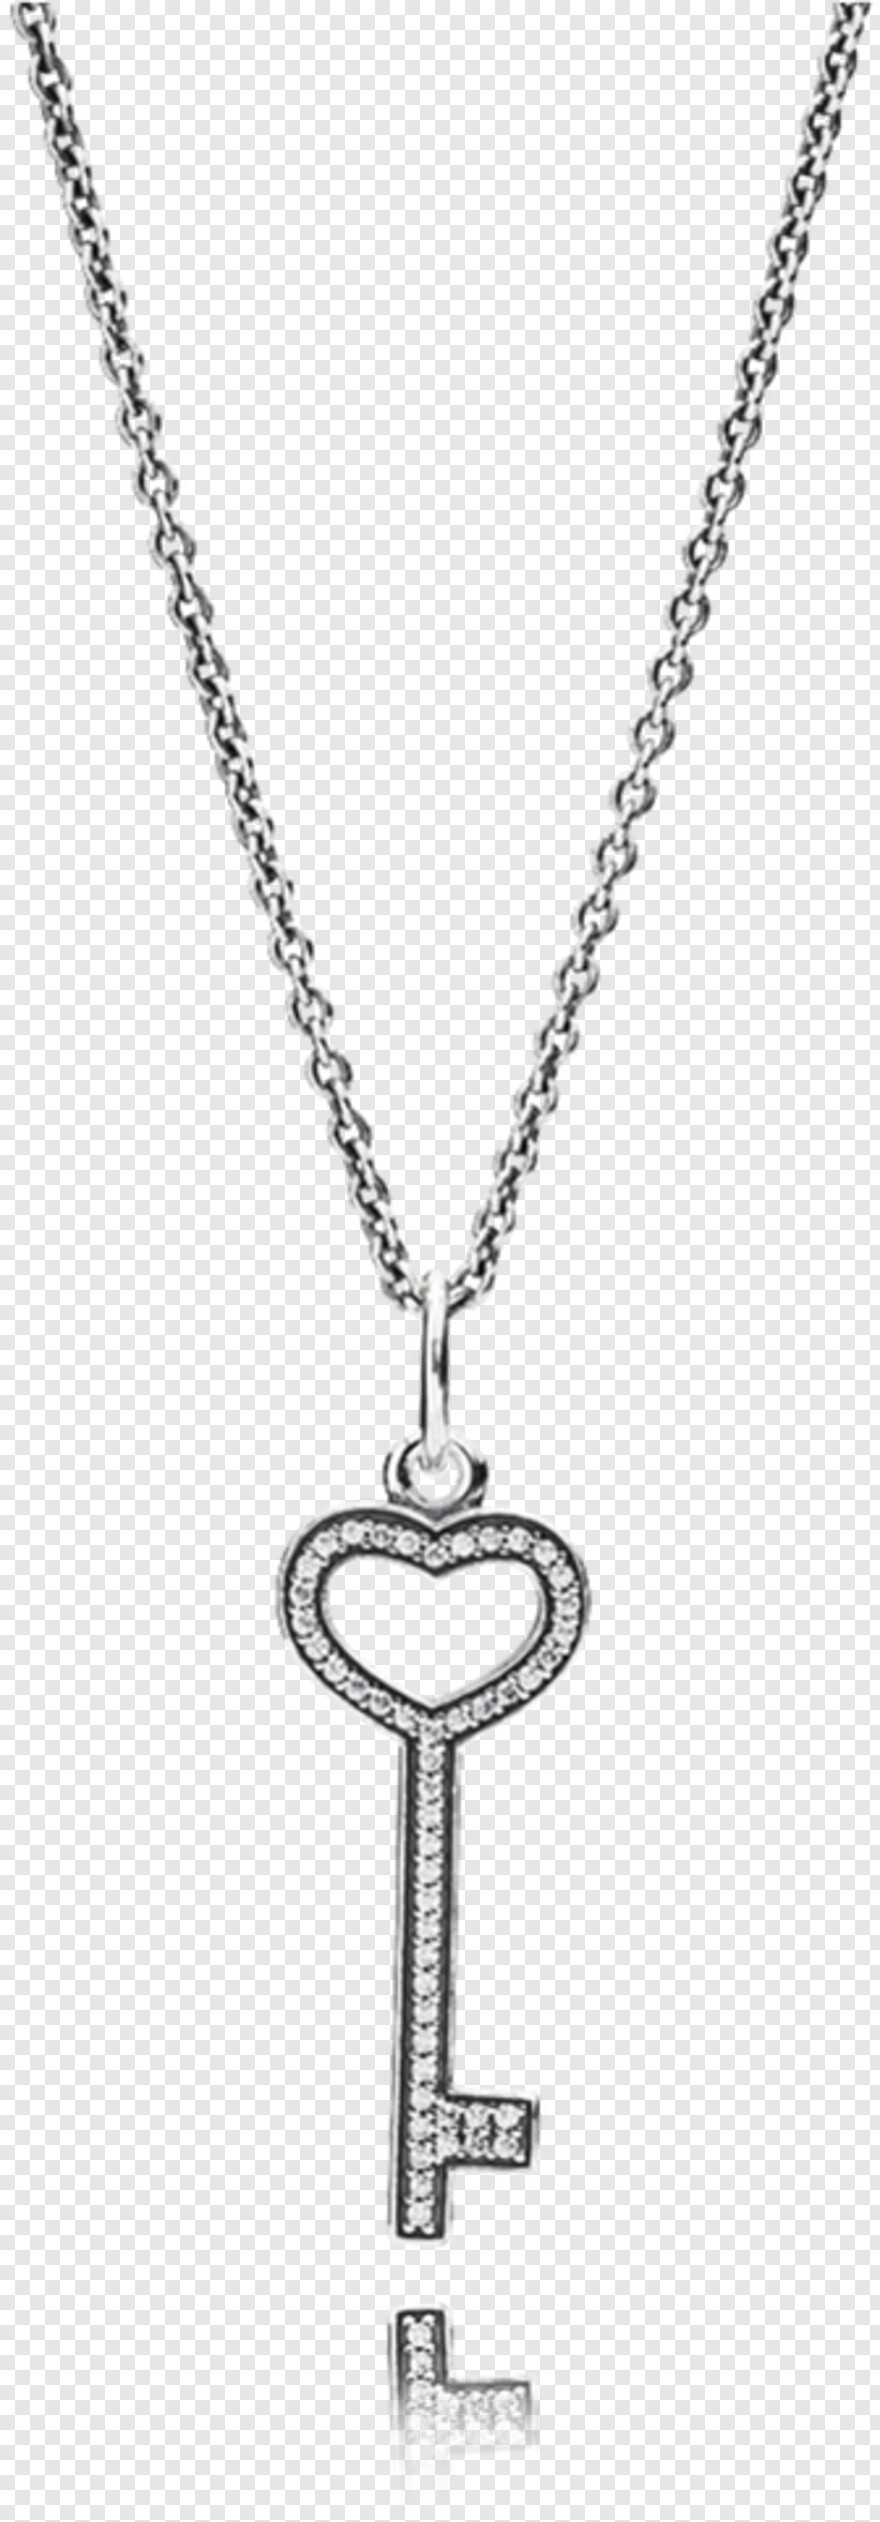 necklace-chain # 732560